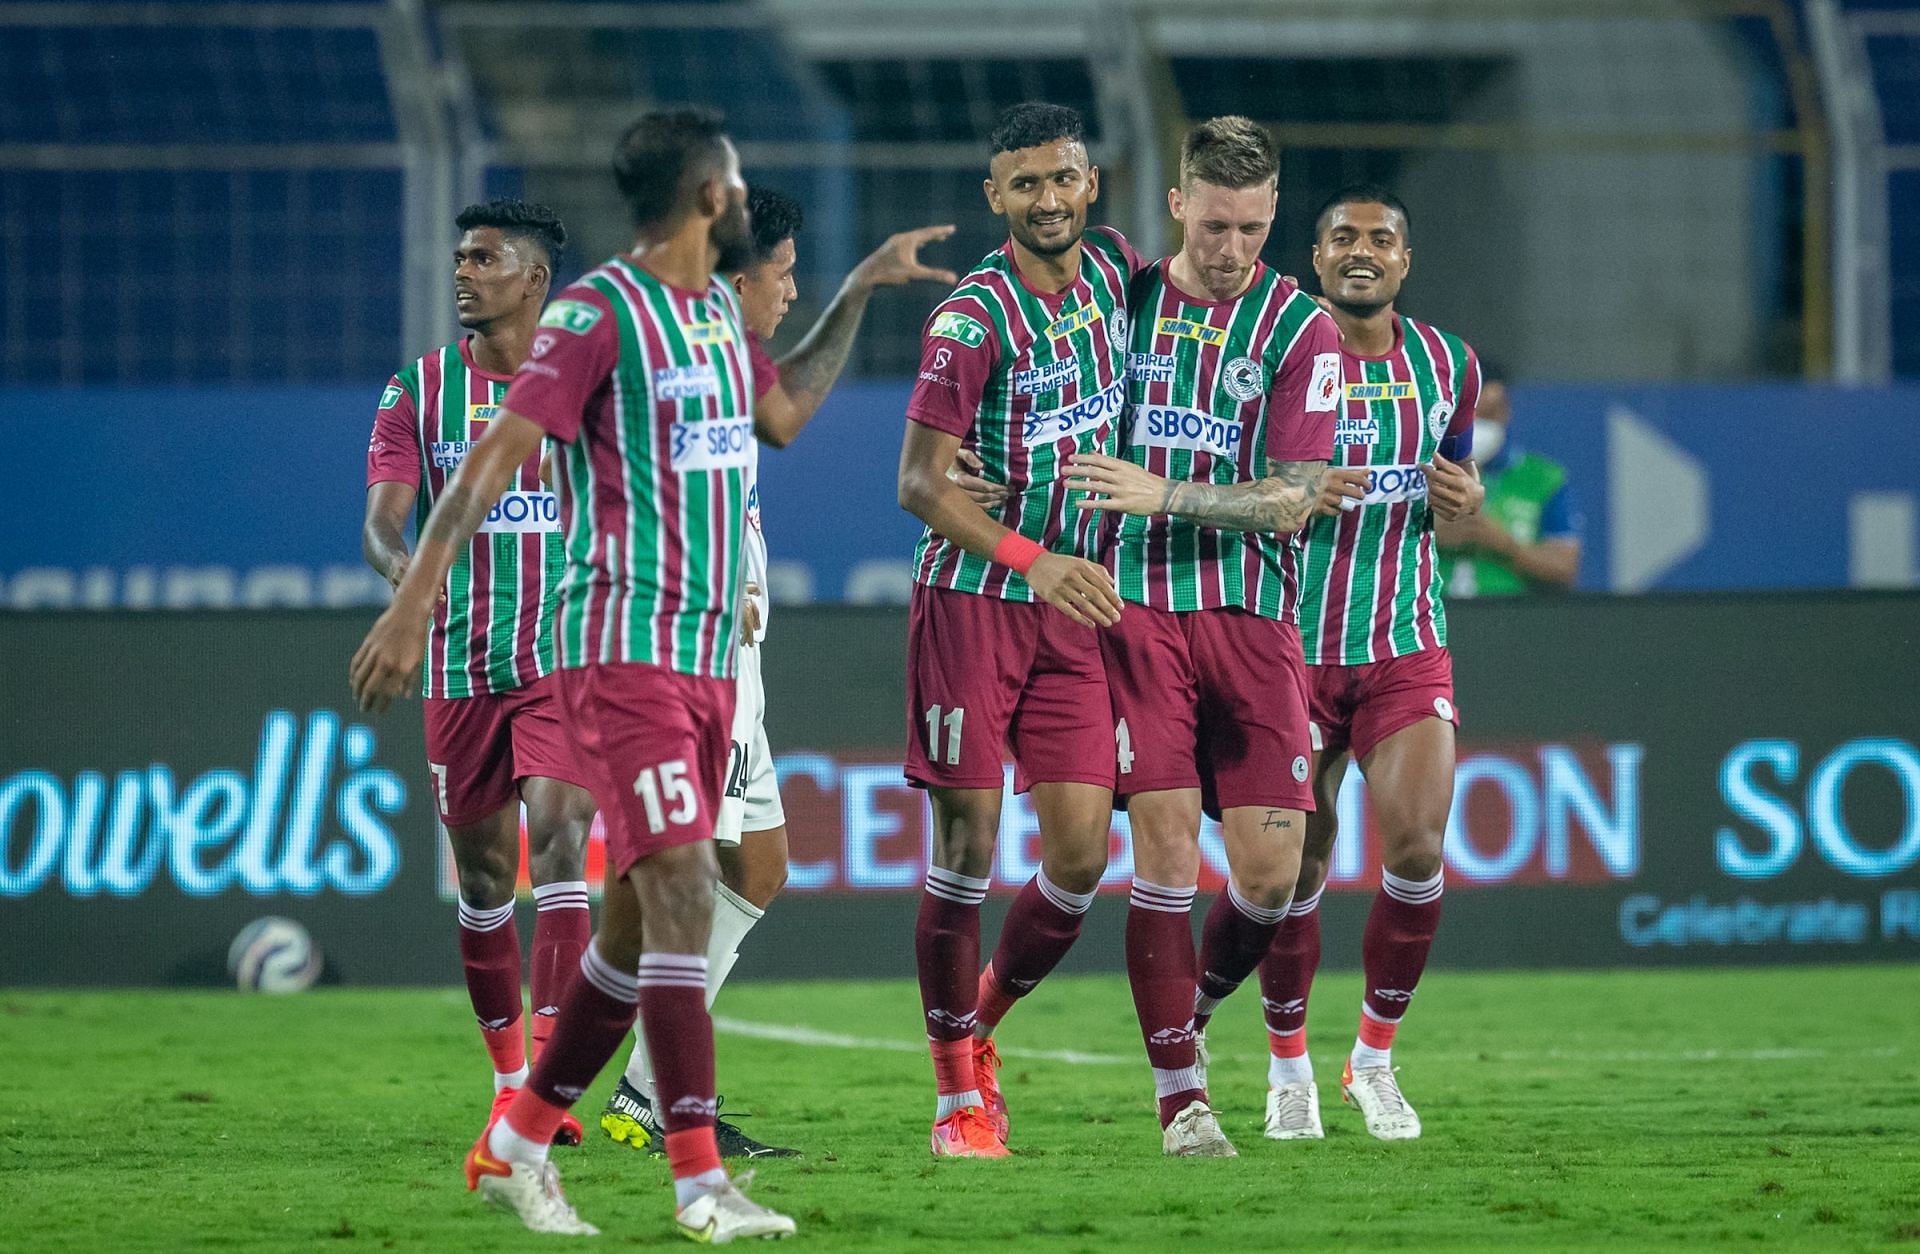 ATK Mohun Bagan players stepped up in the absence of some crucial players (Image courtesy: ISL Media)